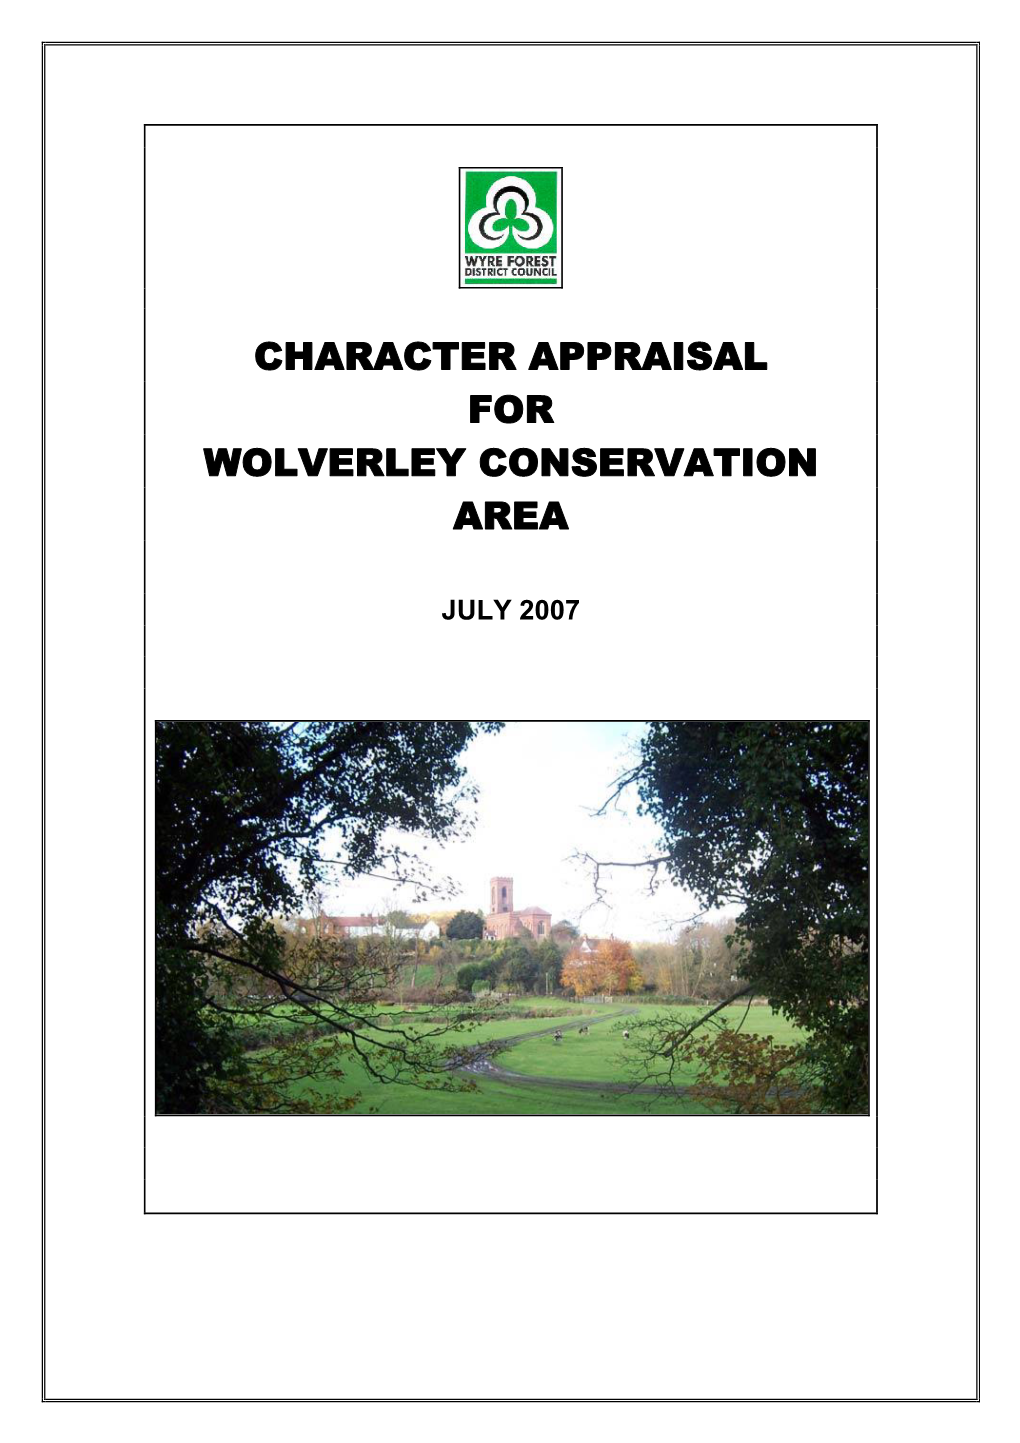 Character Appraisal for Wolverley Conservation Area